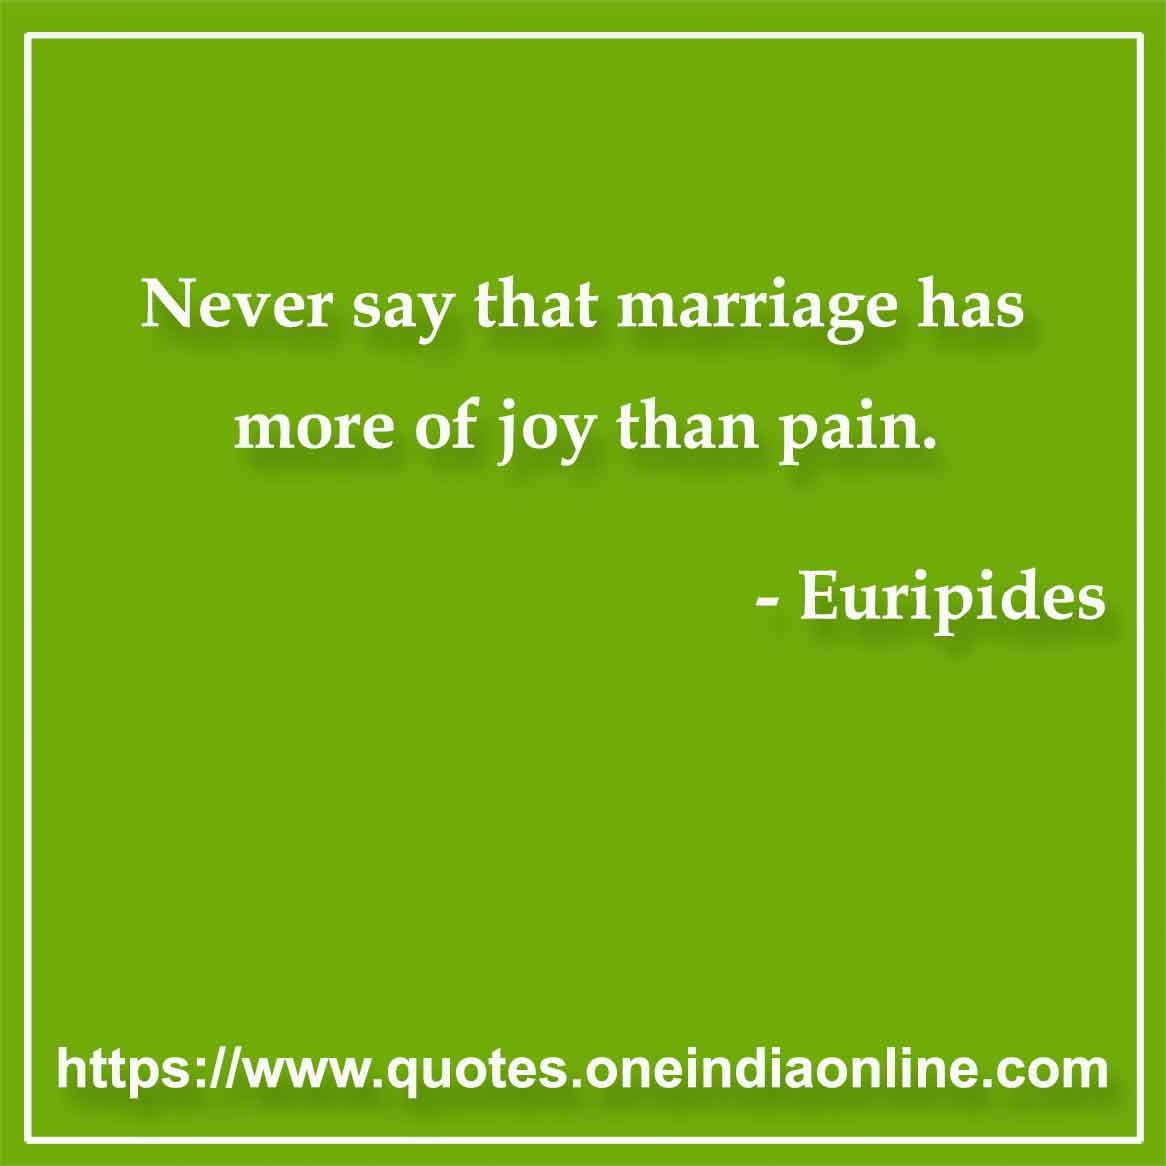 Never say that marriage has more of joy than pain.

- Marriage Quotes by Euripides